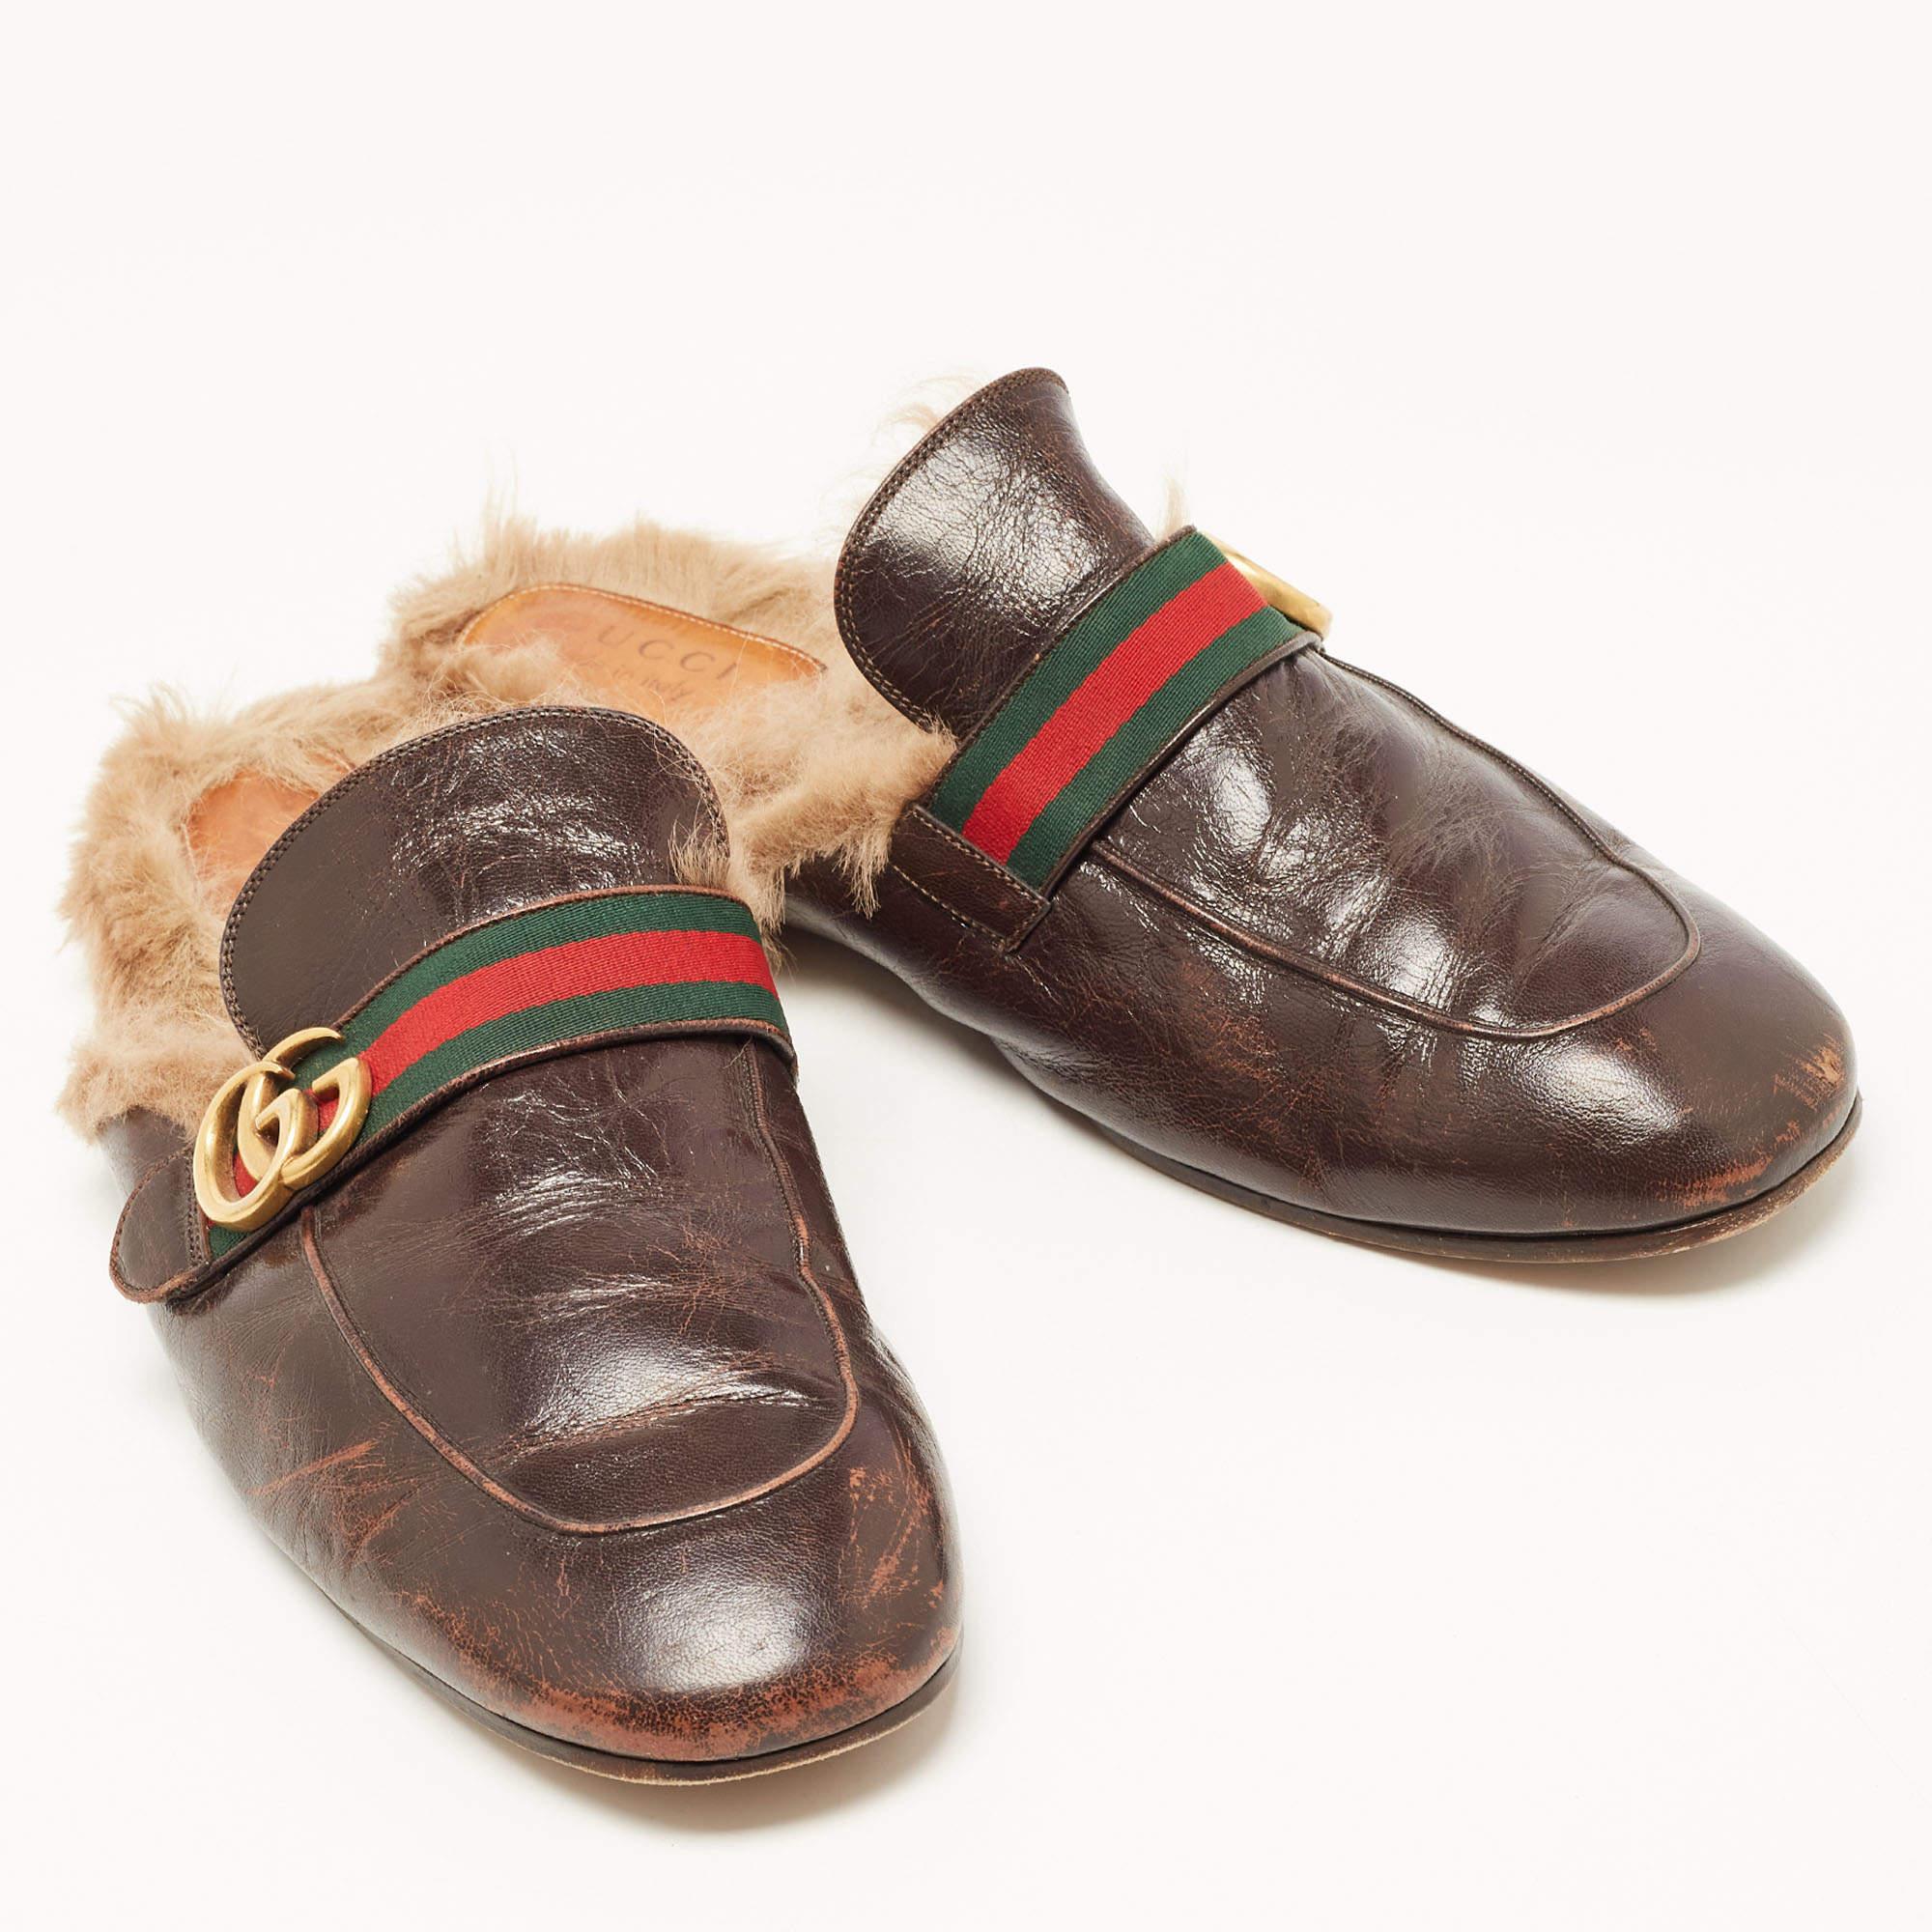 These Gucci Princetown mules signify luxury and practicality. An ultimate favorite of style enthusiasts, its silhouette has the luxe touch of the Horsebit motif on the uppers. It comes made from leather and fur.

